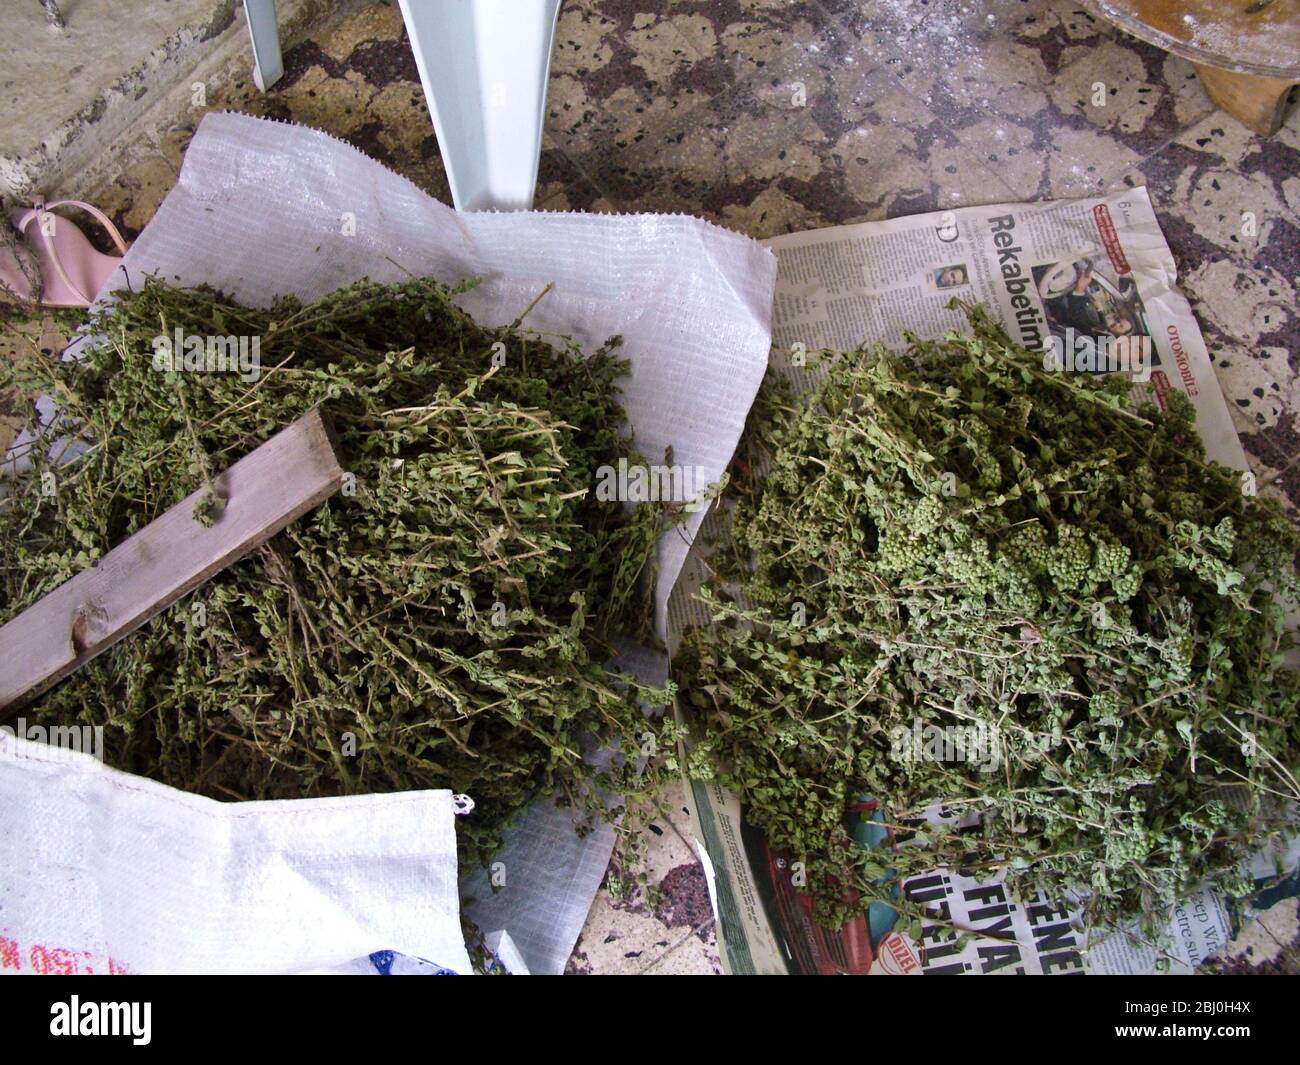 Dried herbs, thyme and oregano (?) in bakery in Selimiye, on the southern coast of Anatolia, Turkey - Stock Photo